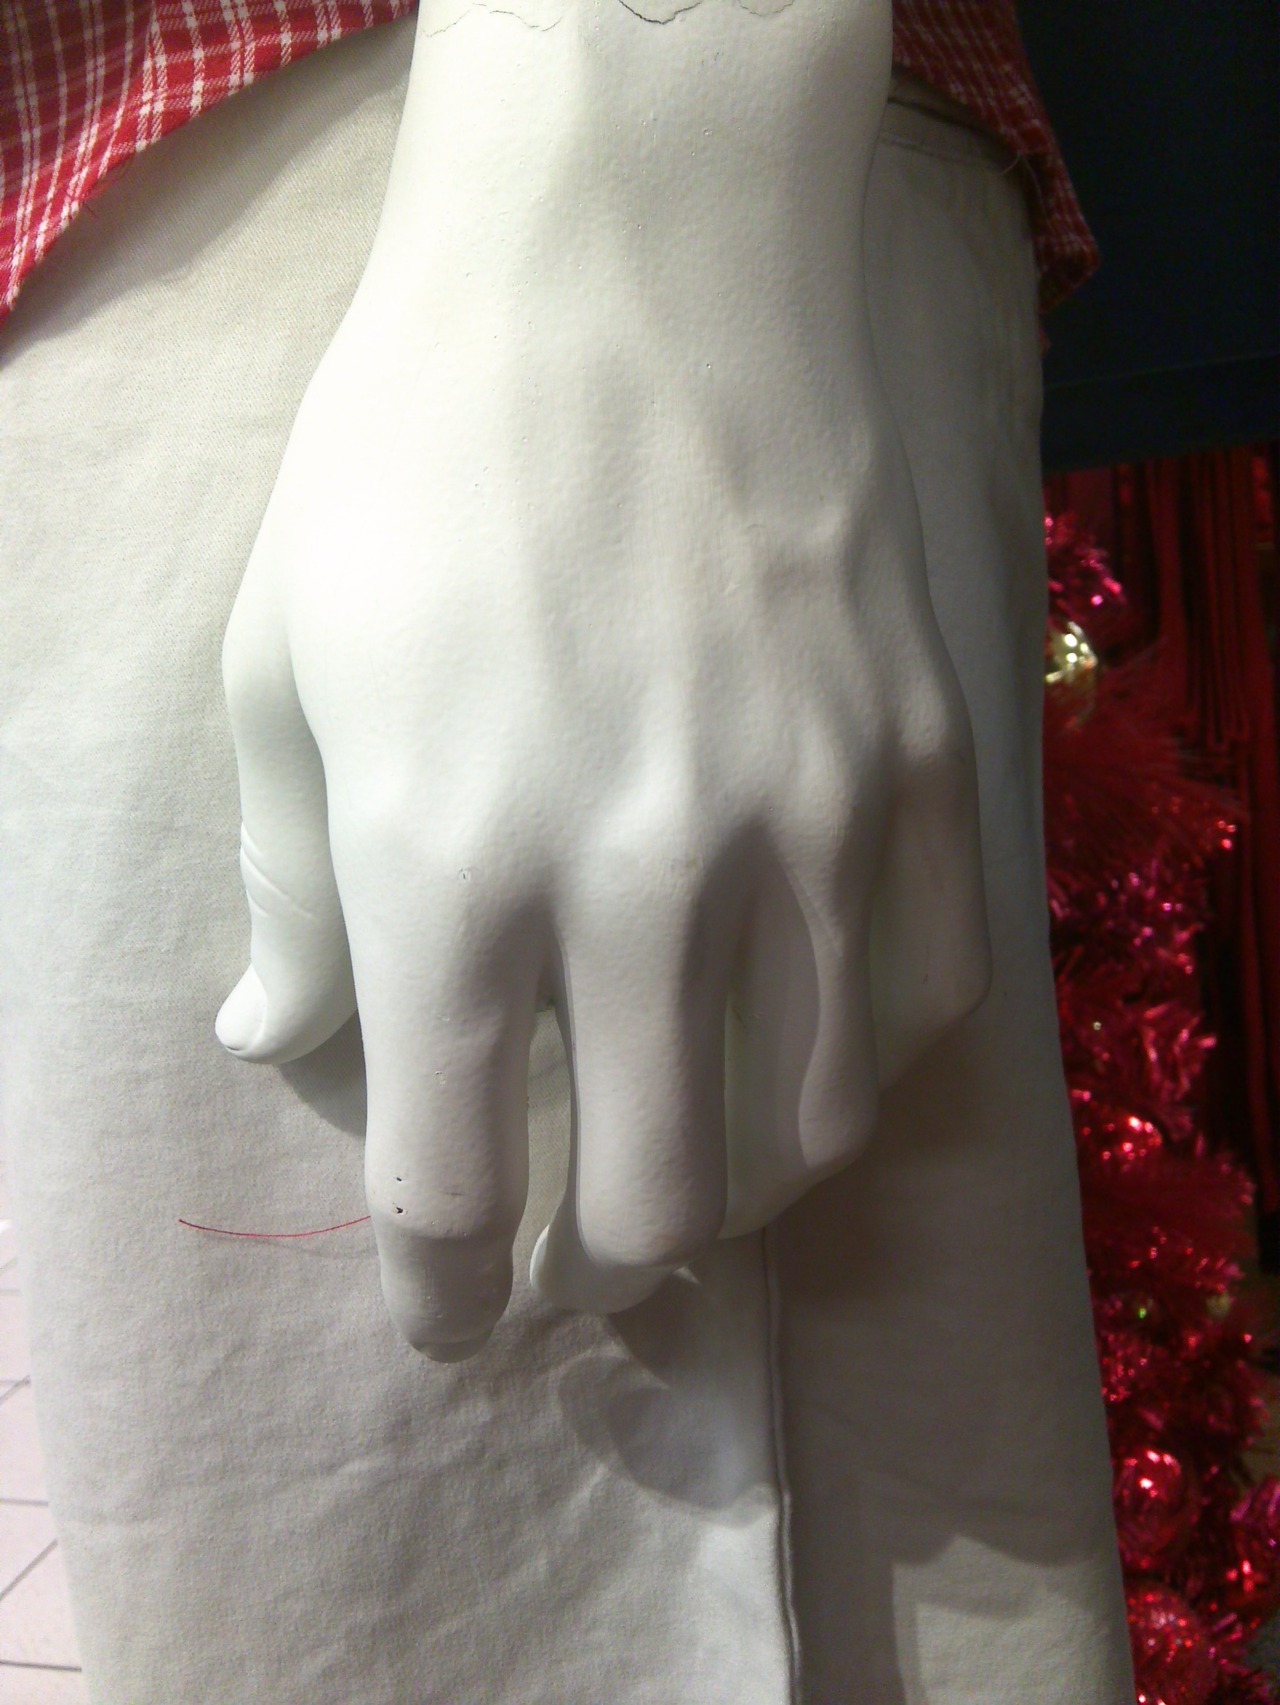 canni8al:  malubami:  lets talk about how insanely detailed the hands on the mannequins